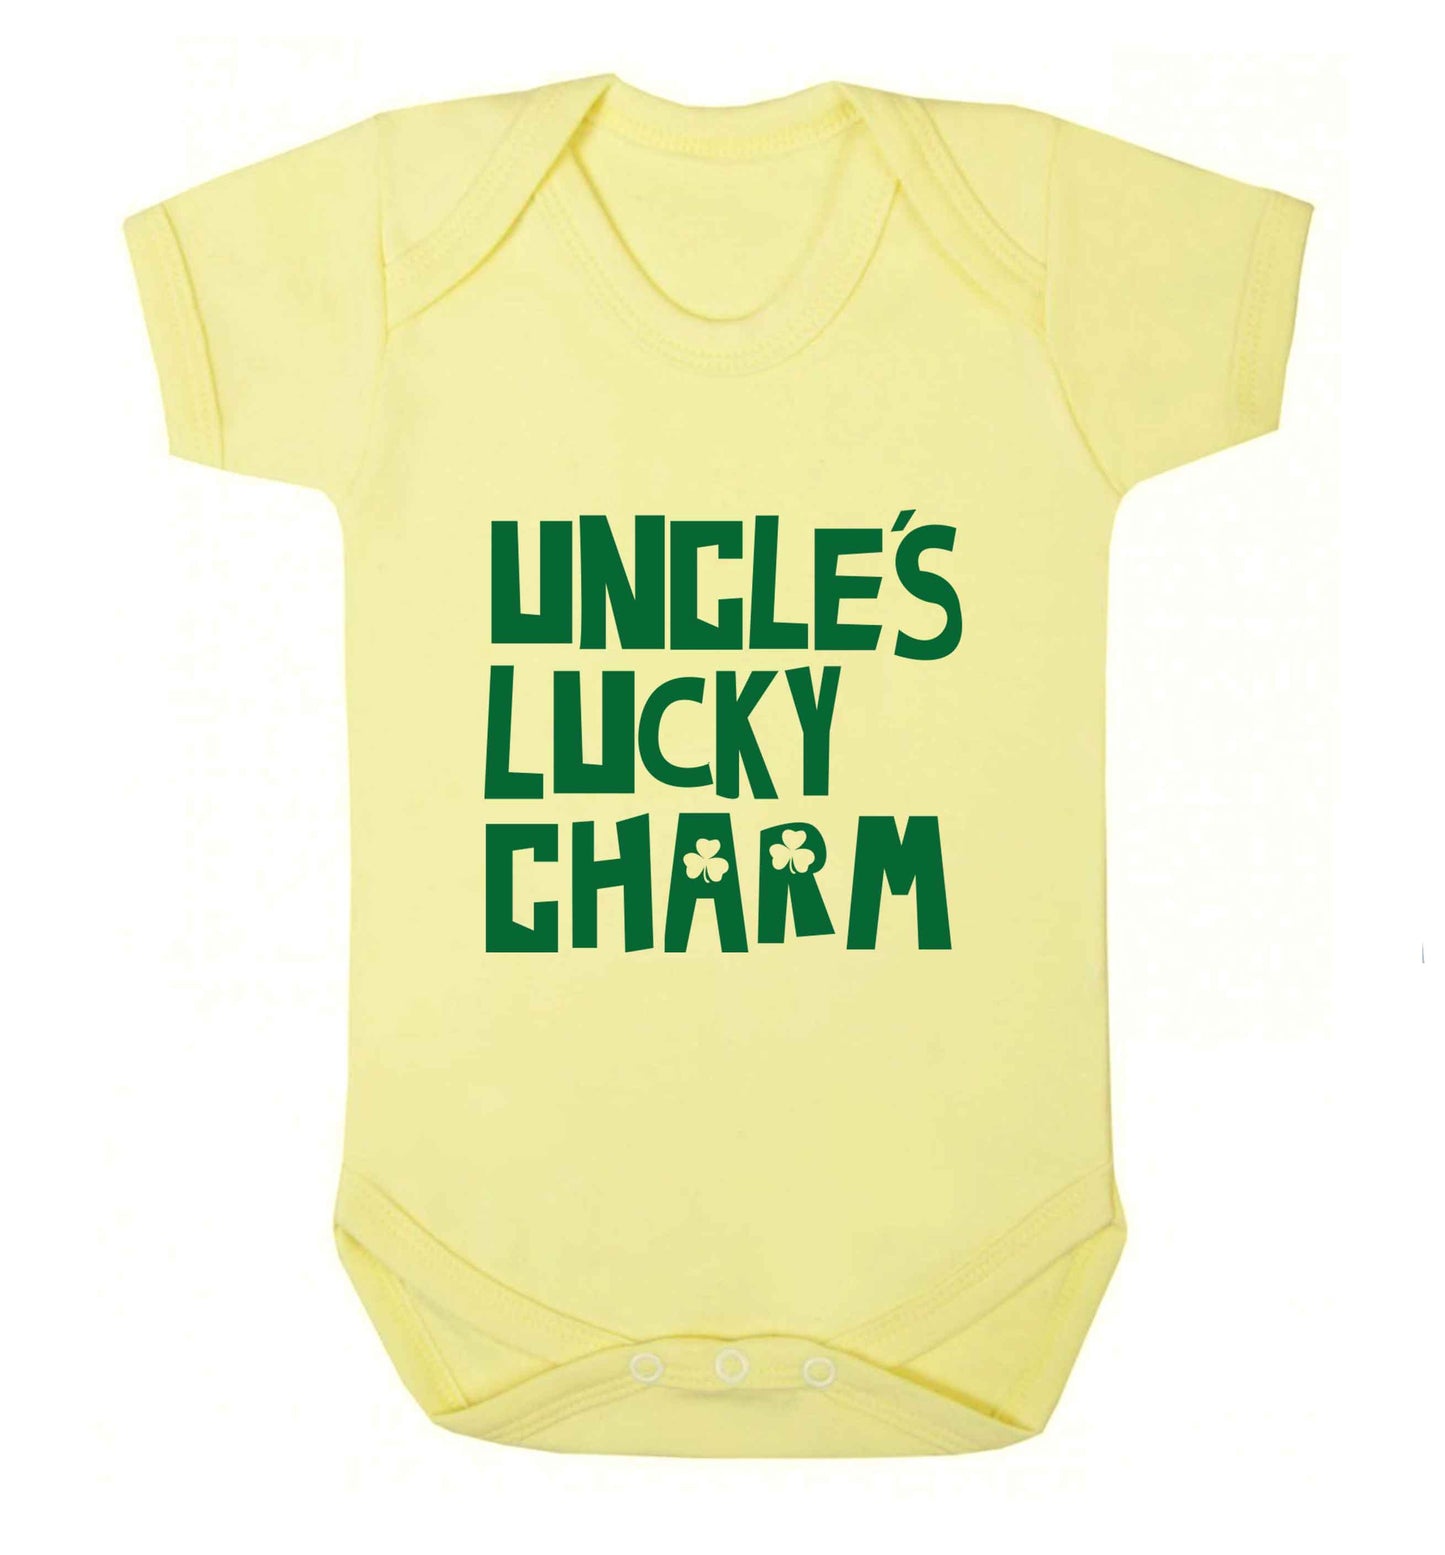 Uncles lucky charm baby vest pale yellow 18-24 months